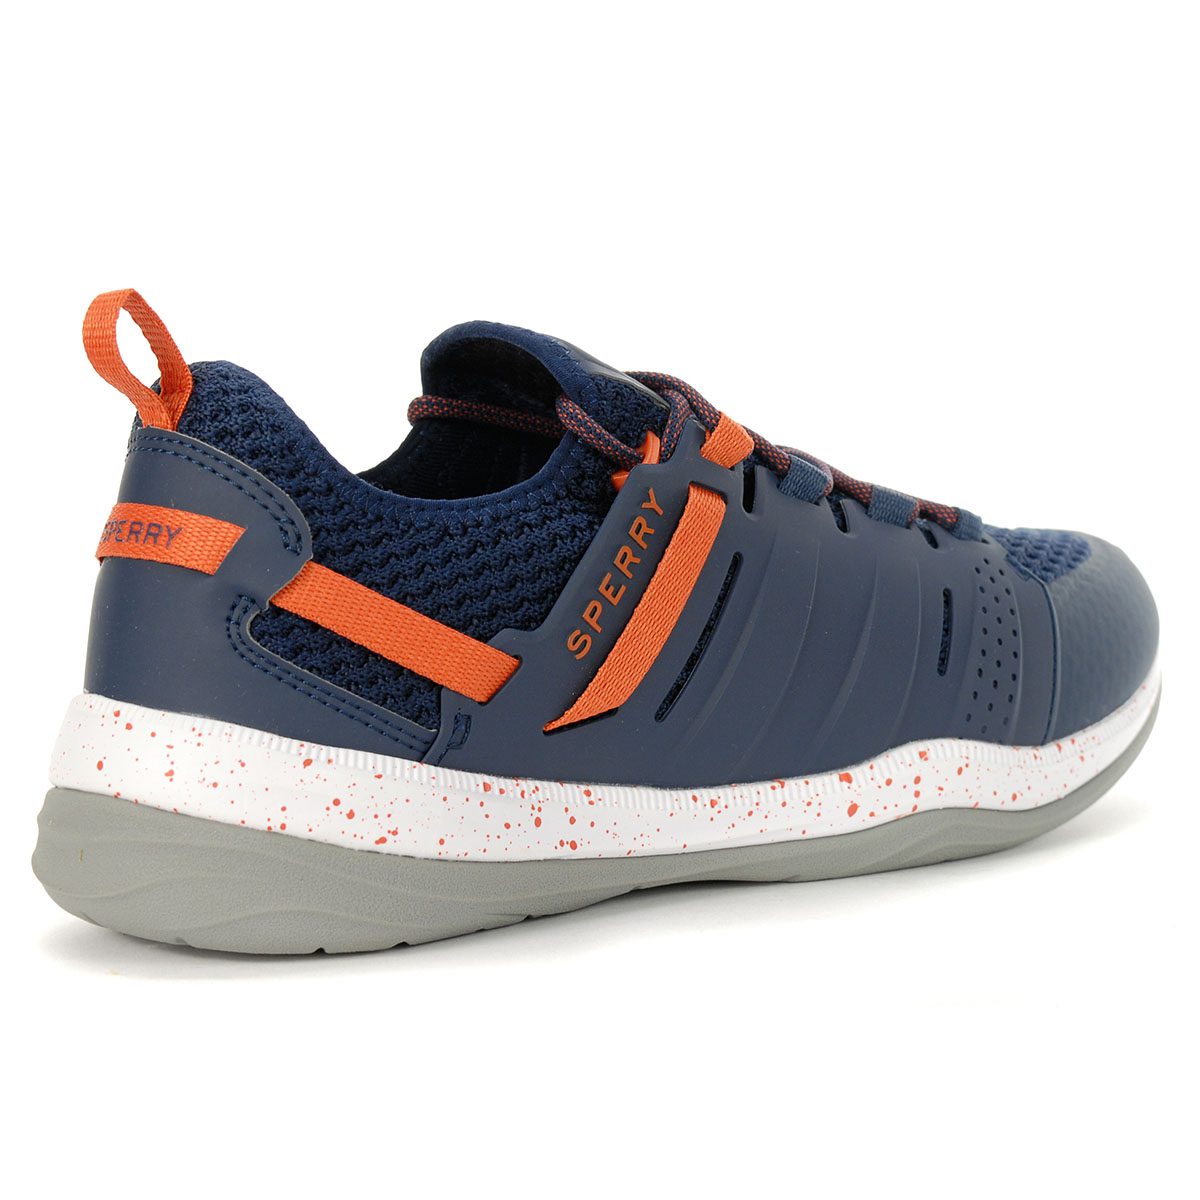 Sperry Top-Sider H20 Mainstay Sneaker Mens